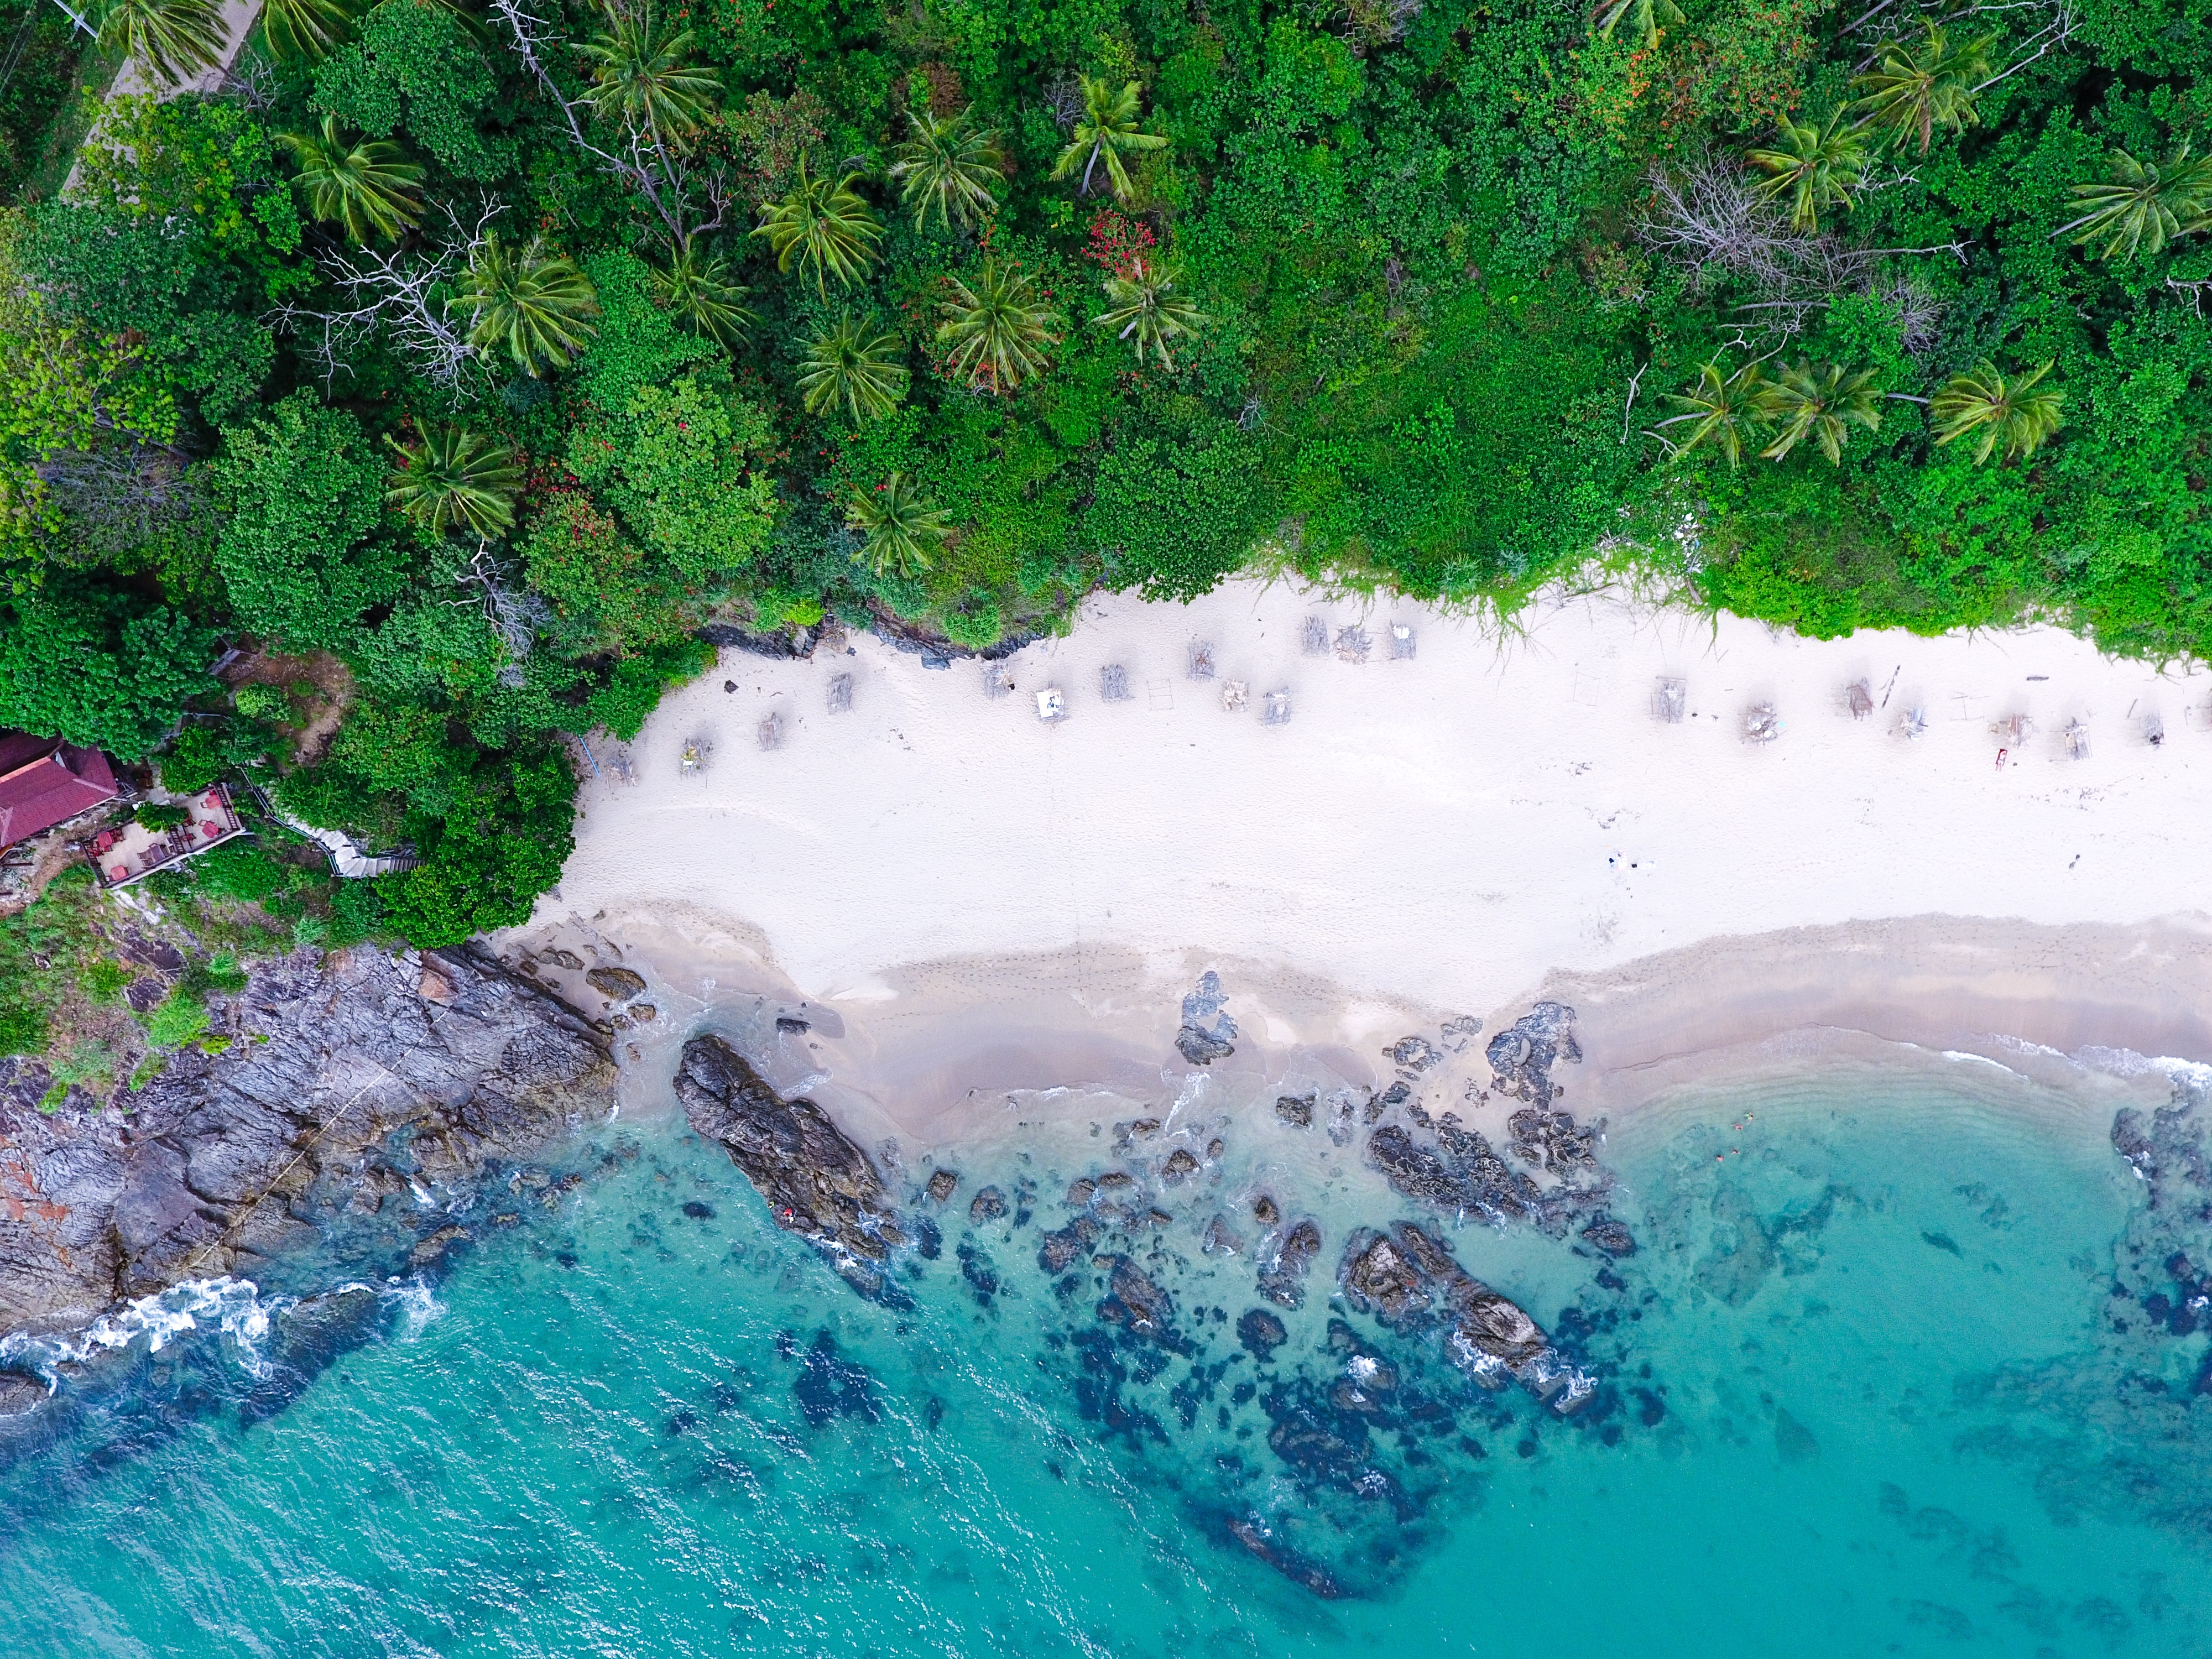 Aerial view of water hitting rocks on a seashore near trees